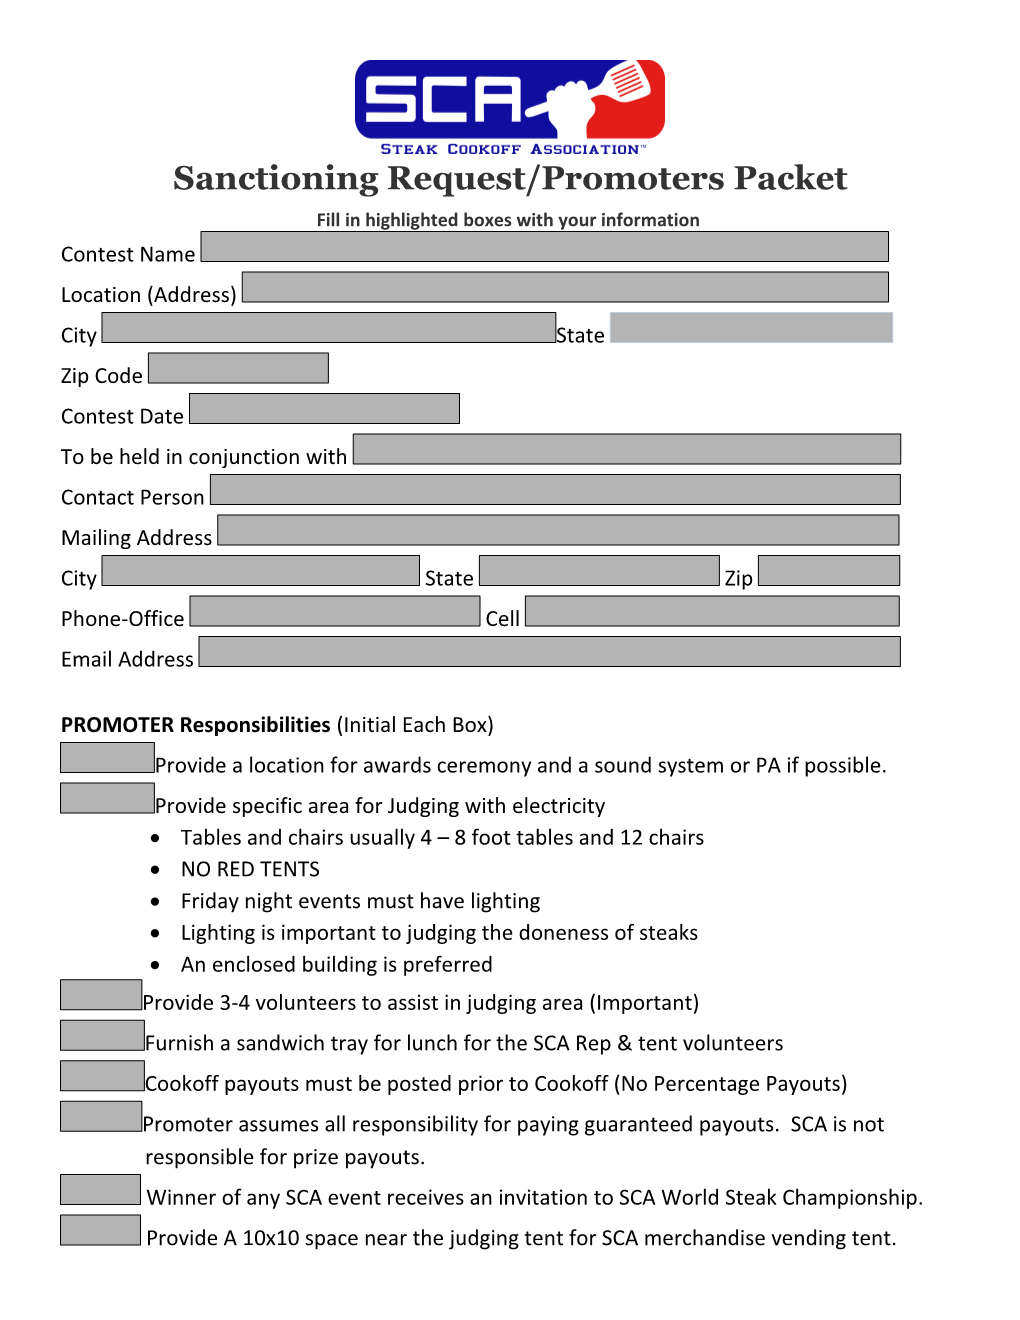 Sanctioning Request/Promoters Packet